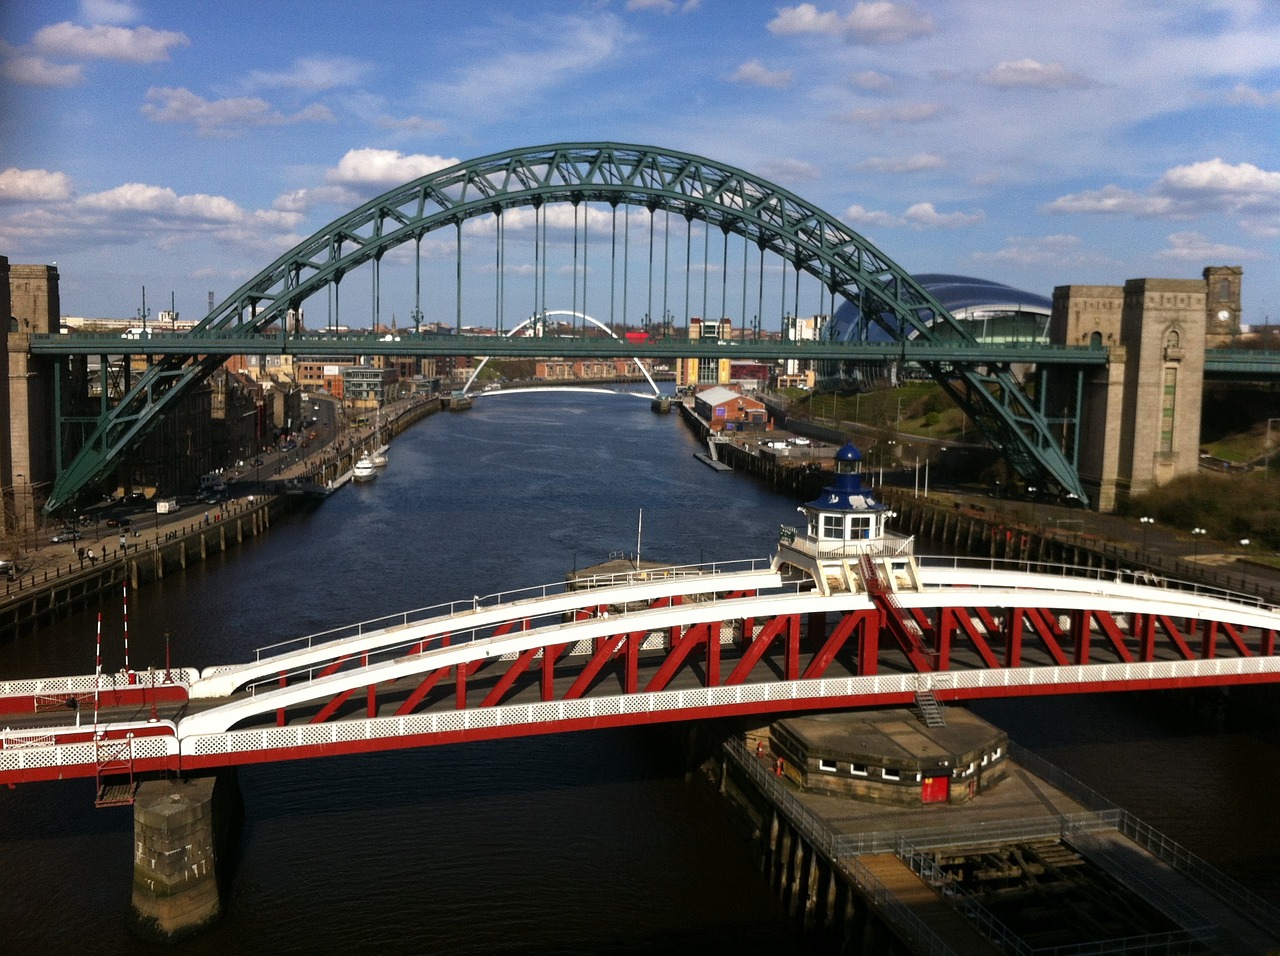 Destination North East England welcomed leading regenerative tourism experts from the GDS-Movement to the North East